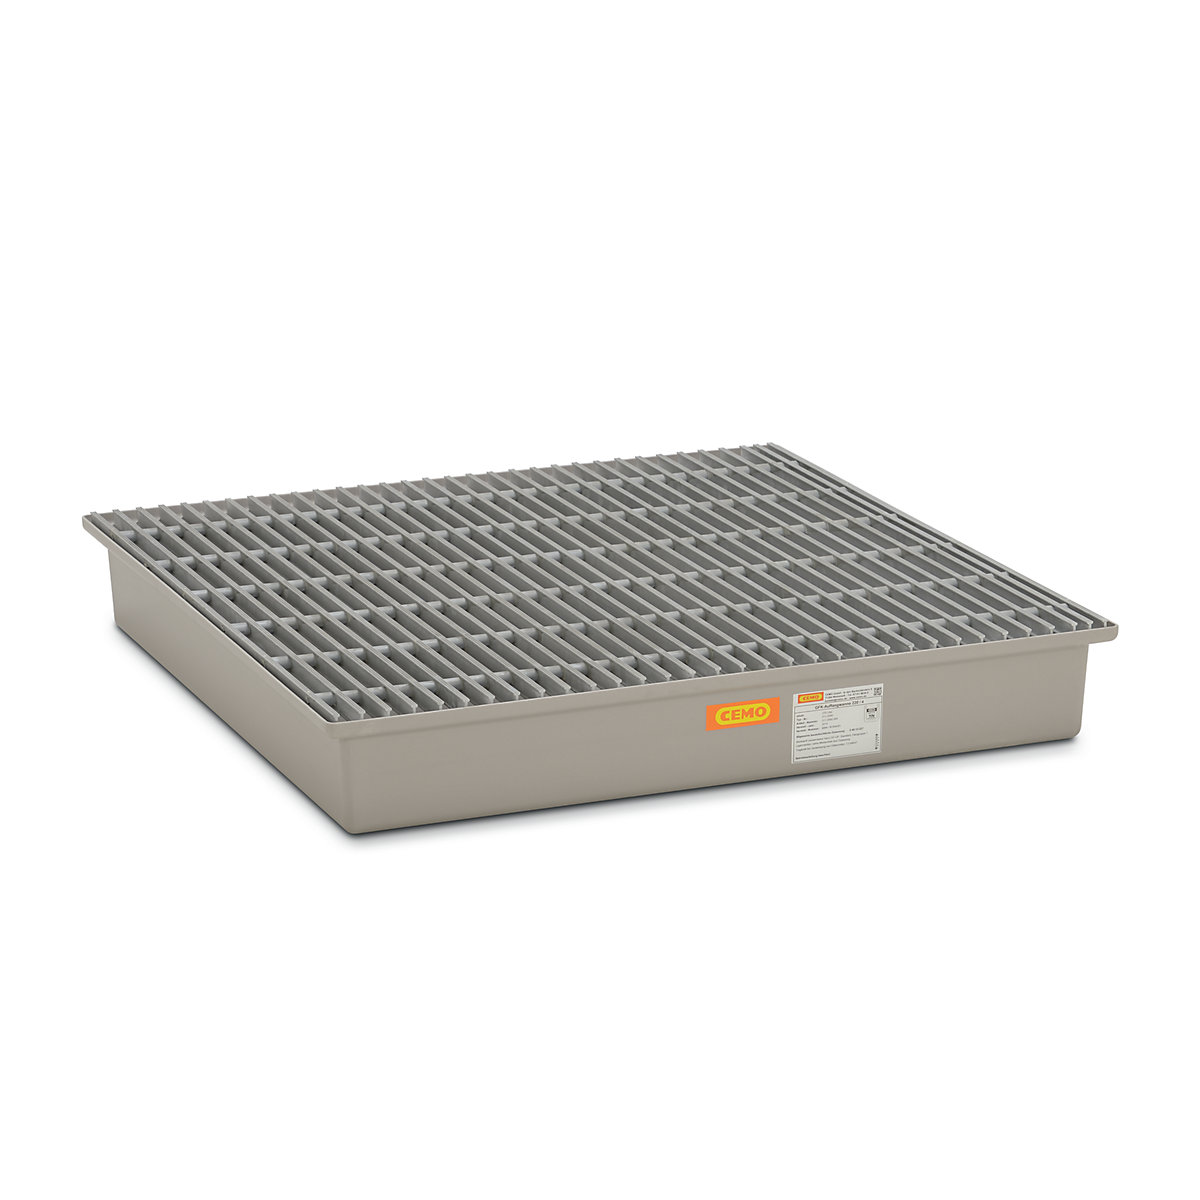 GRP base sump tray – CEMO, 4 x 200 litre drums, with certification, with GRP grate-4